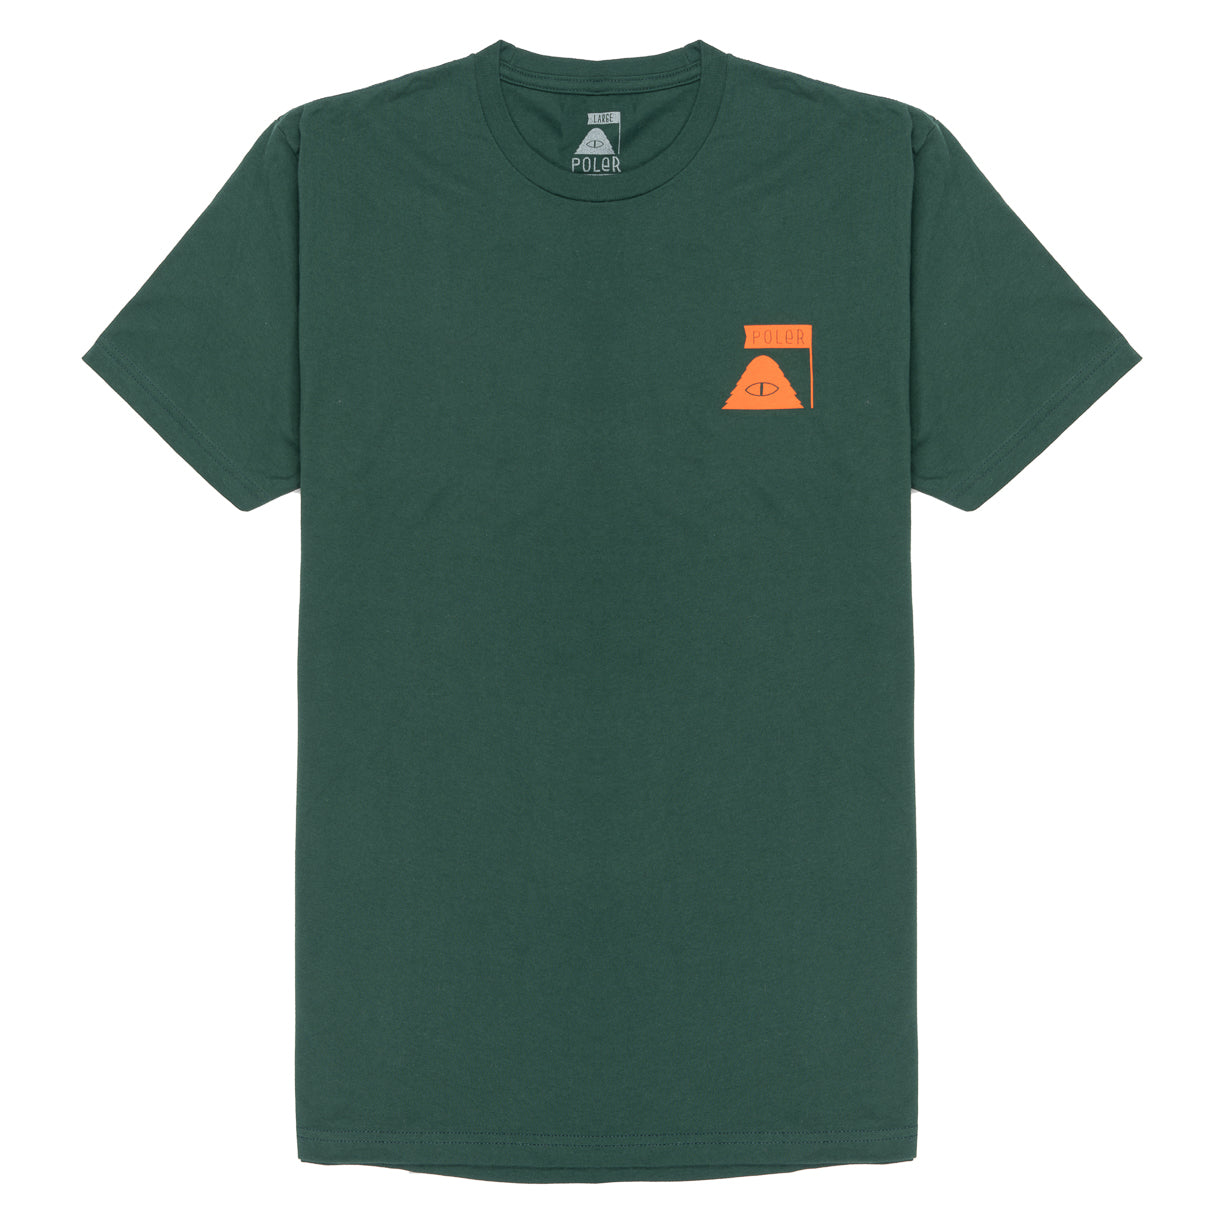 Downhill Tee Tee FOREST GREEN M 